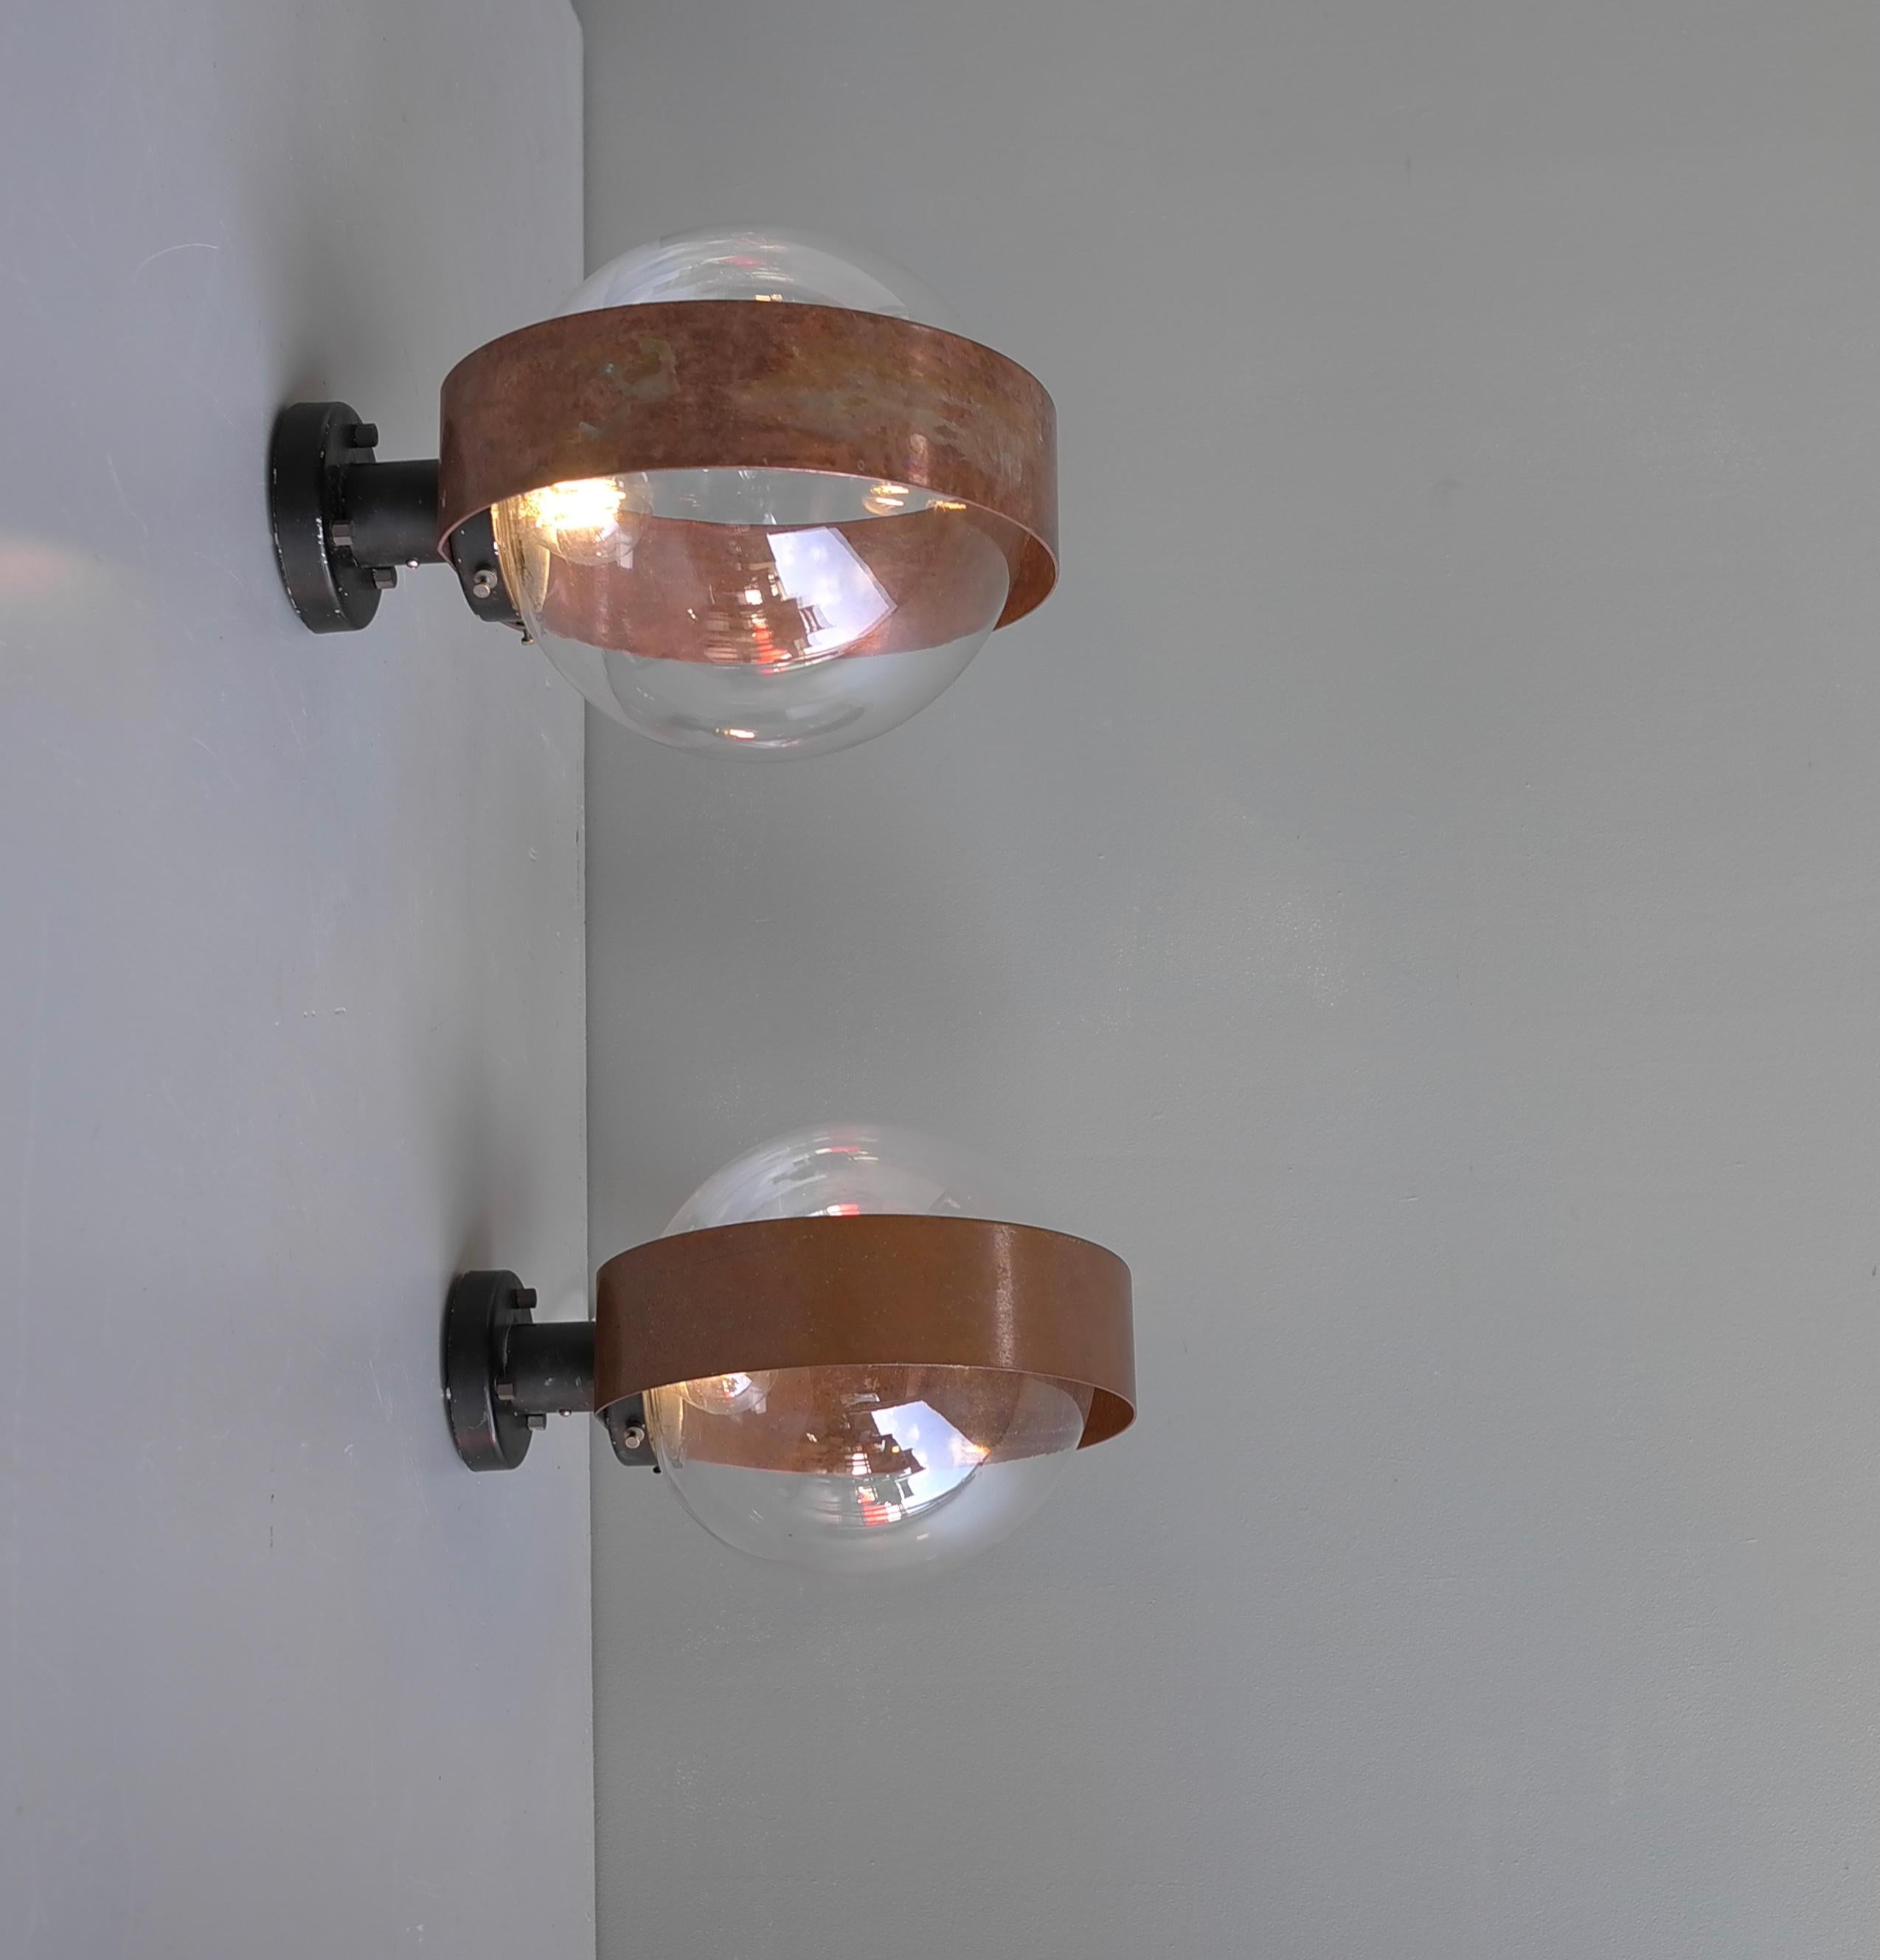 Pair of Scandinavian Glass Ball Wall lamps with Copper Patina Rims, 1960's For Sale 13